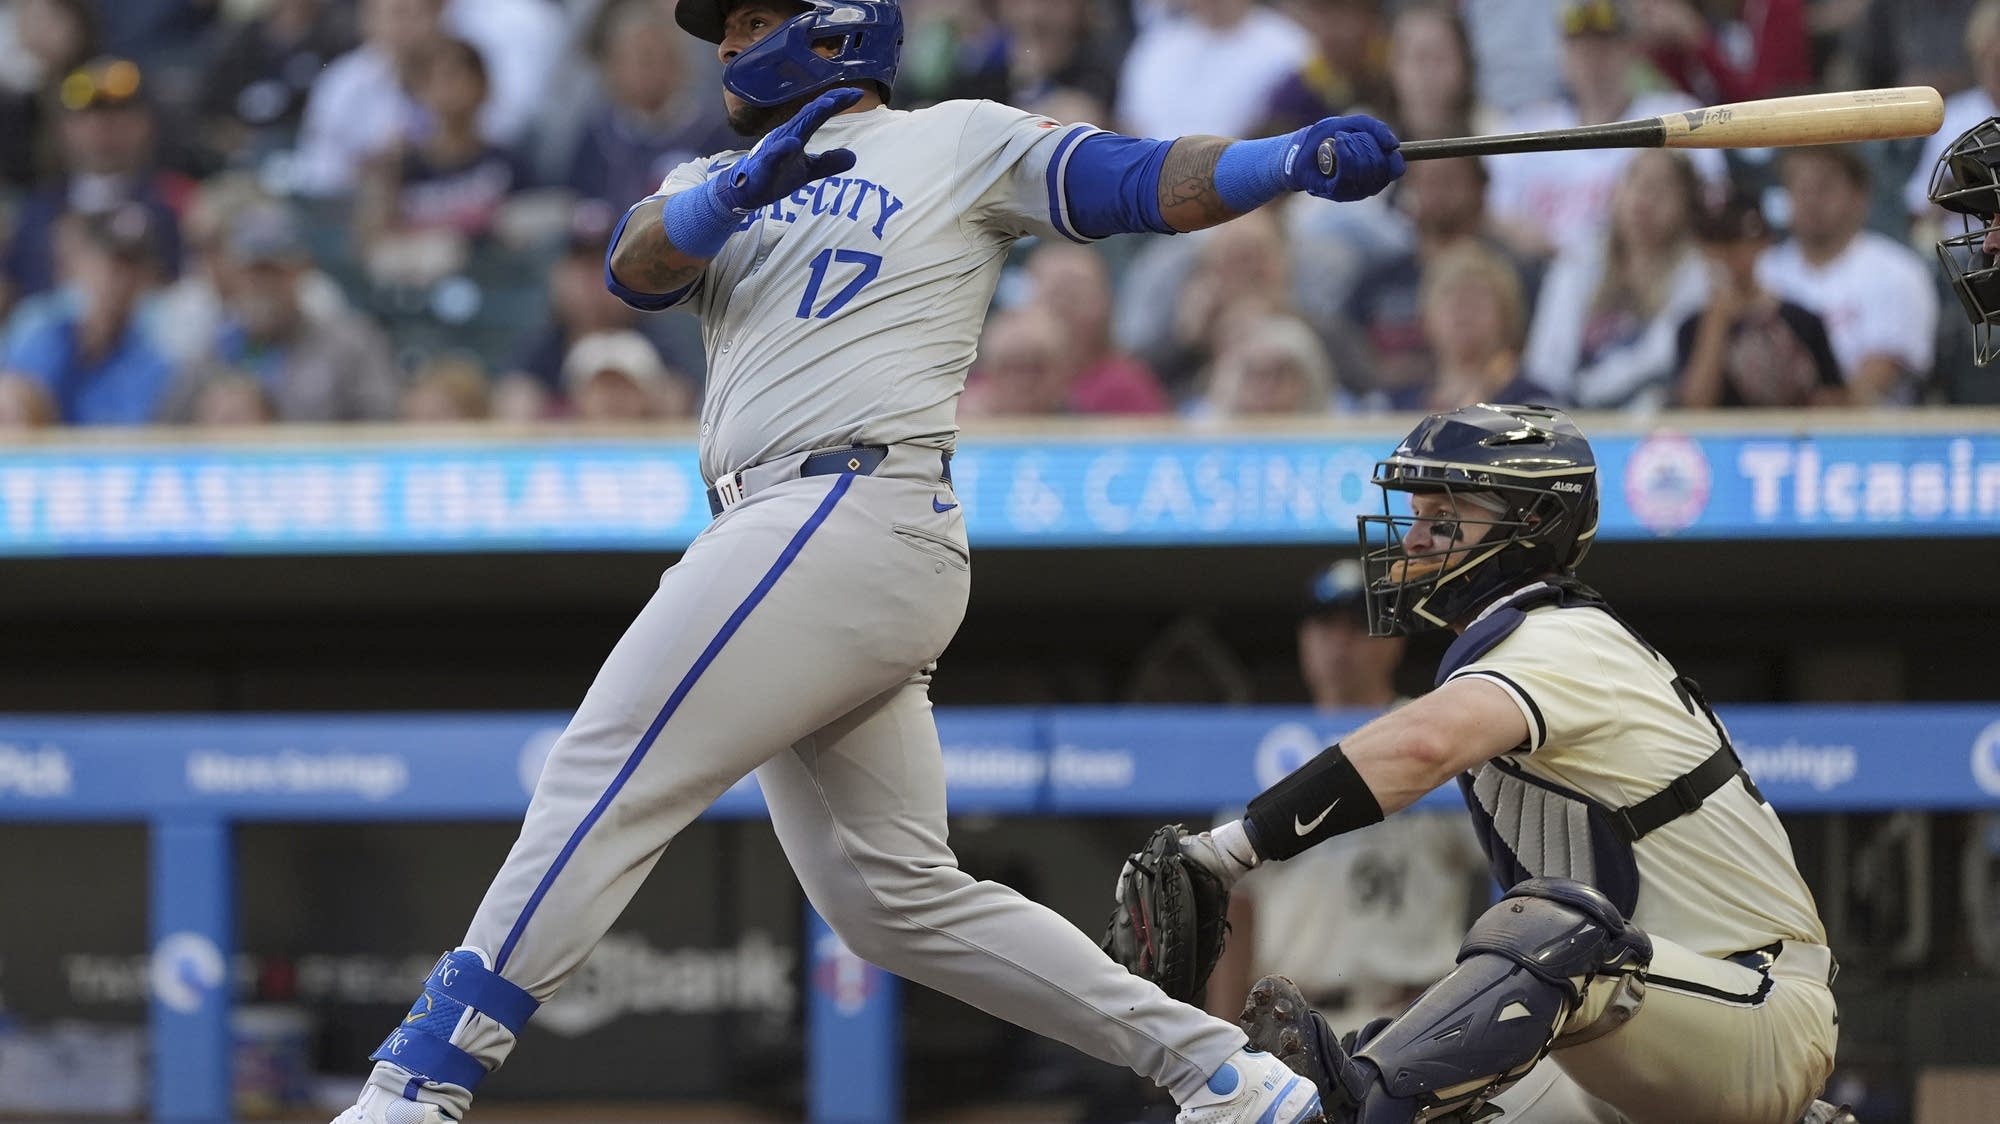 Velázquez hits 2 HRs, Perez adds solo shot as Royals snap skid with 6-1 win over Twins